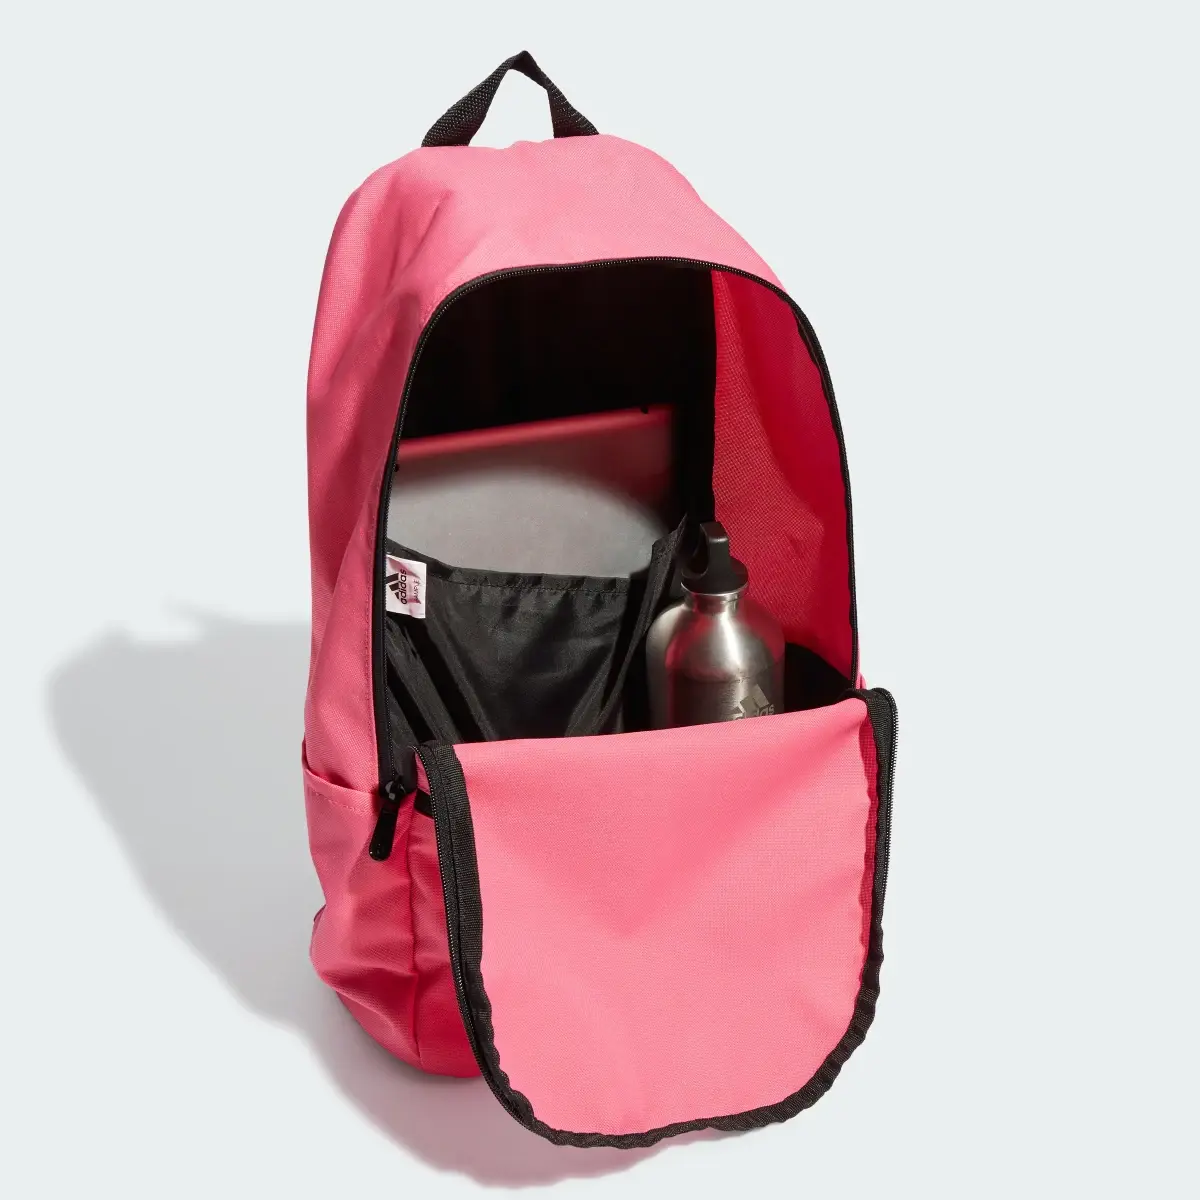 Adidas Classic Foundation Backpack. 3